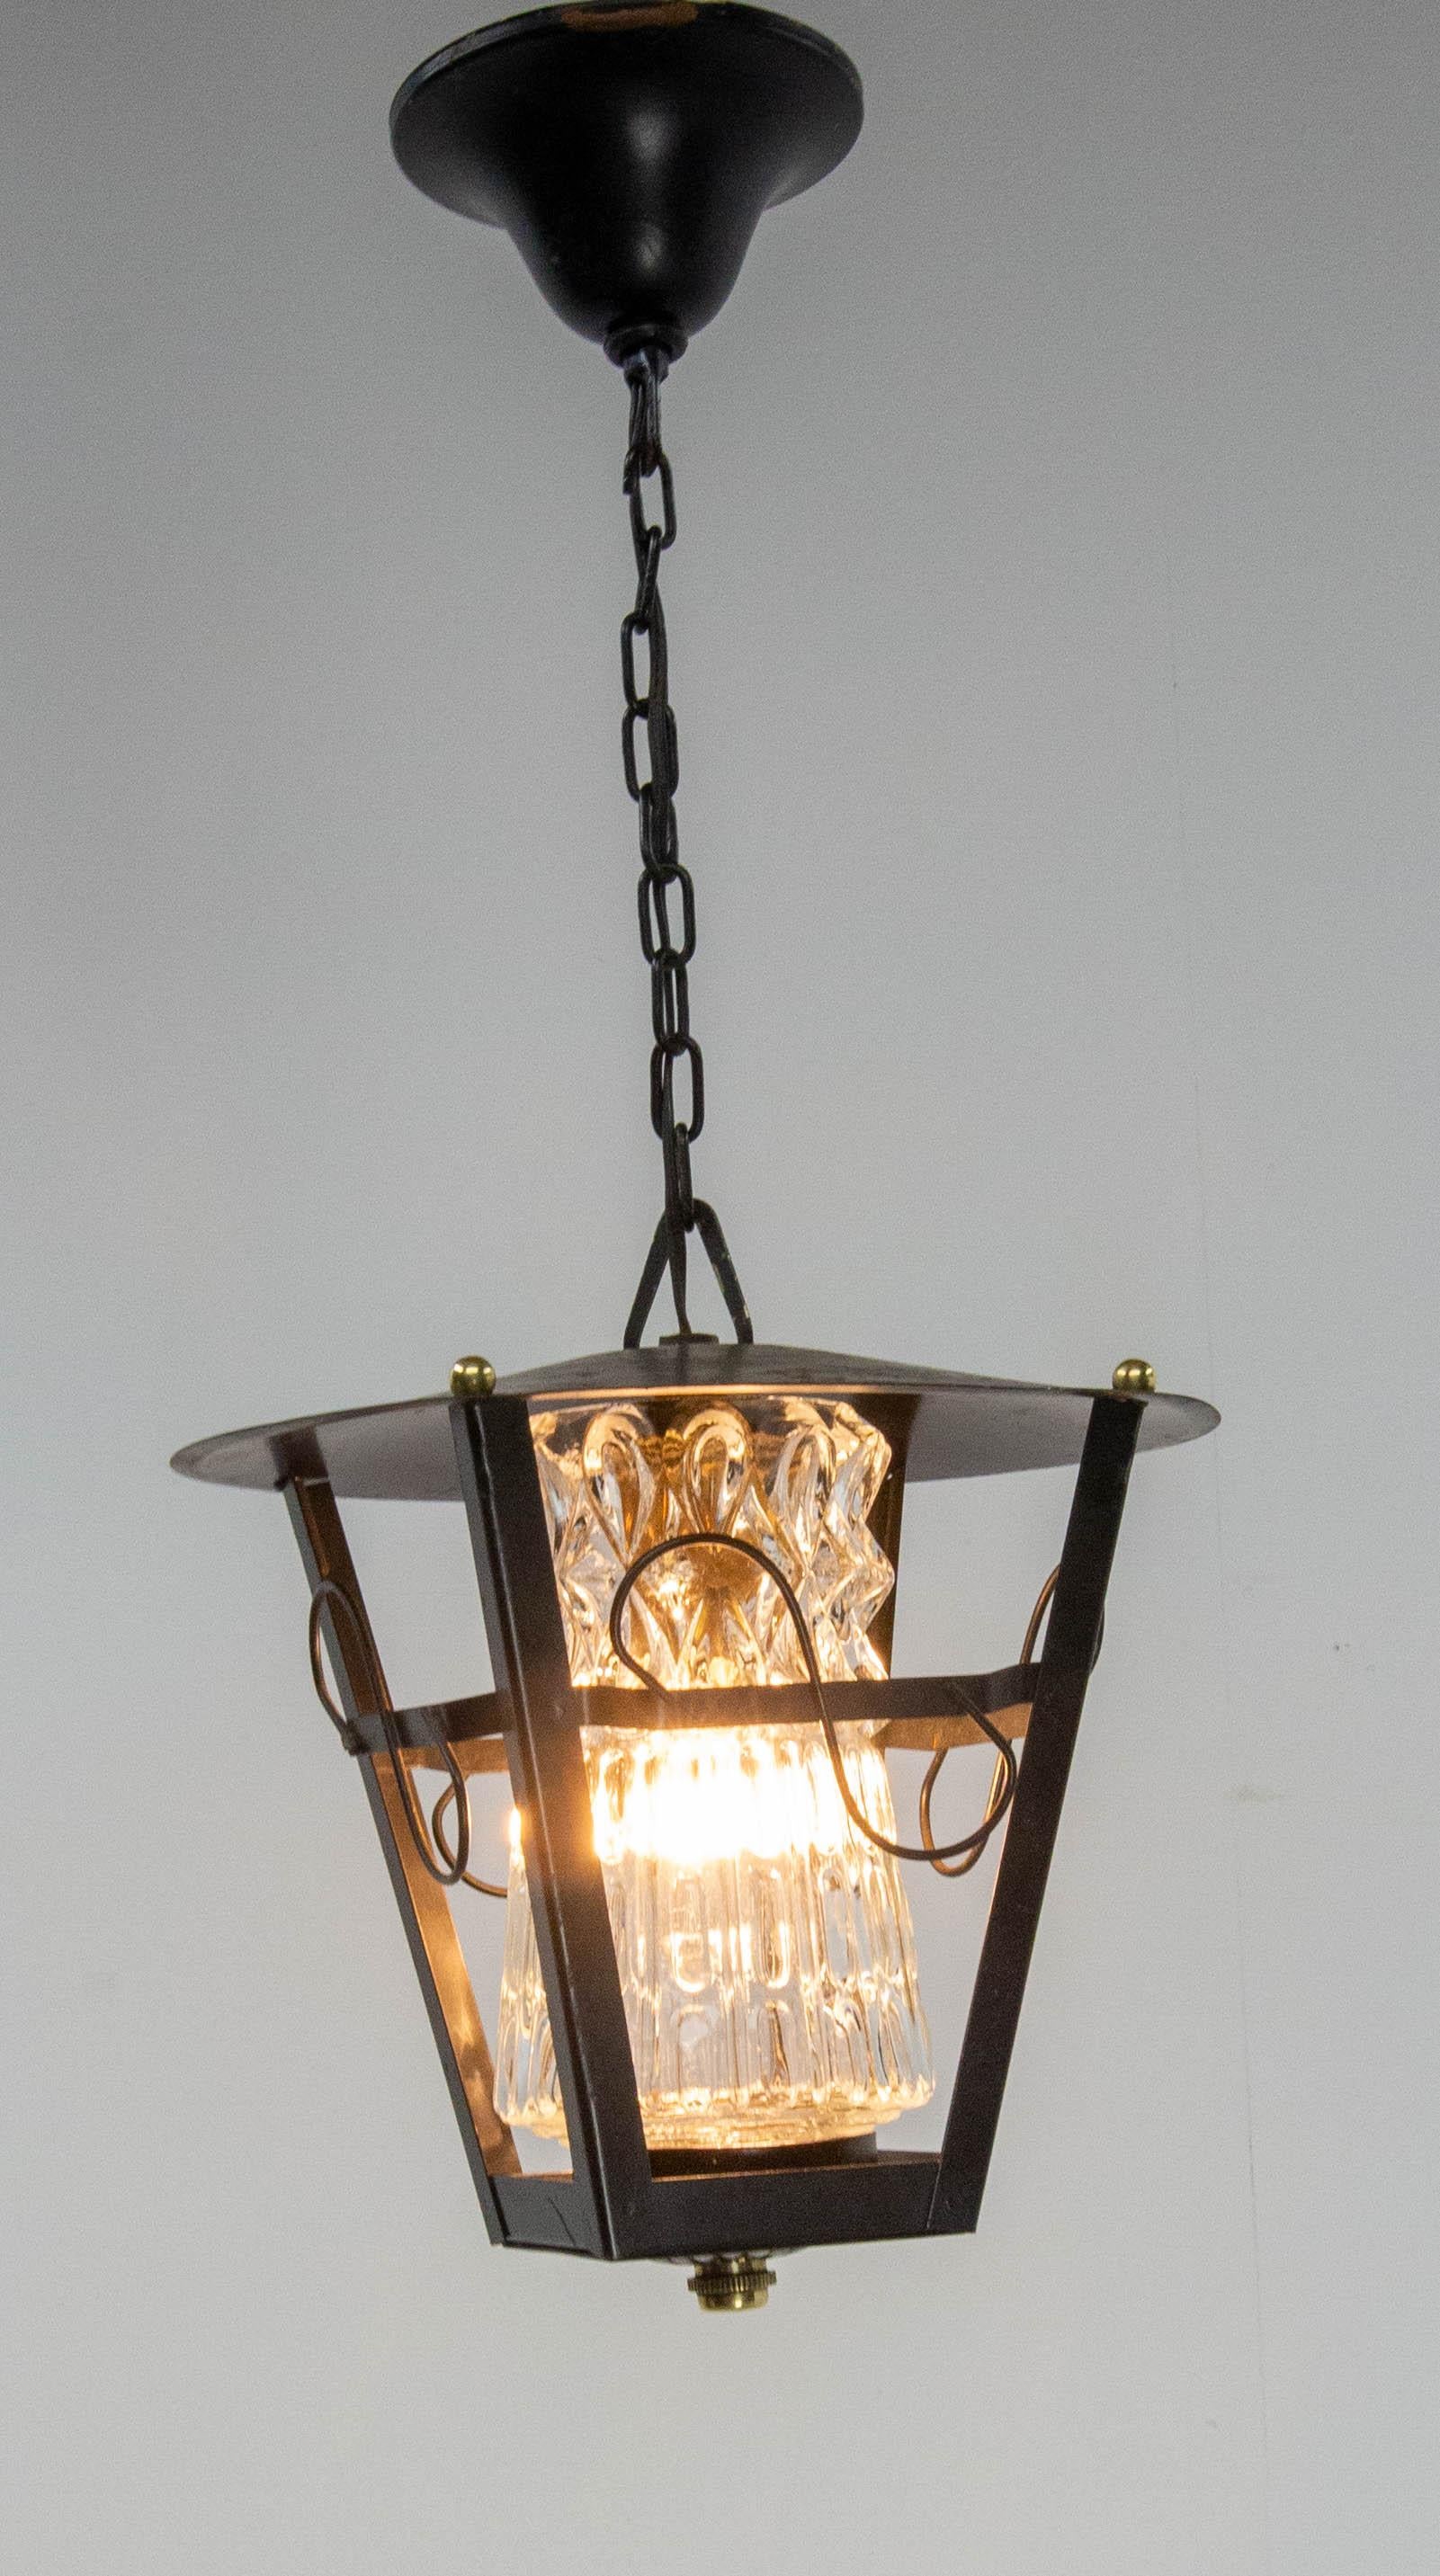 Mid-Century Modern Iron and Glass Ceiling Lamp Lustre French Lantern, circa 1960 For Sale